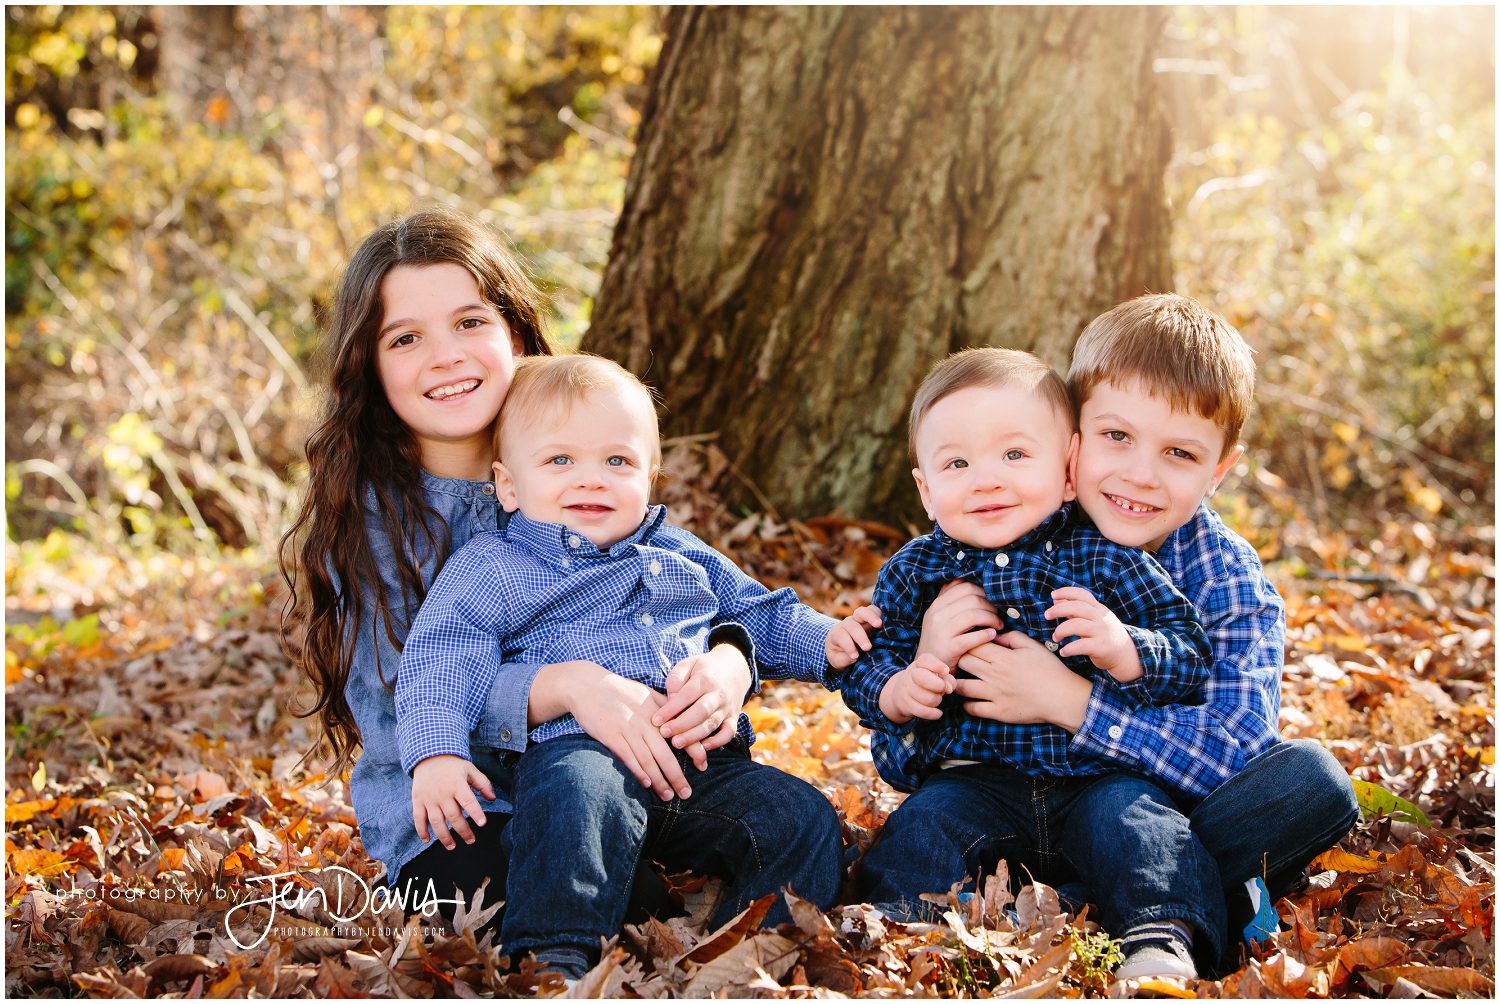 4 Siblings sitting together in the leaves